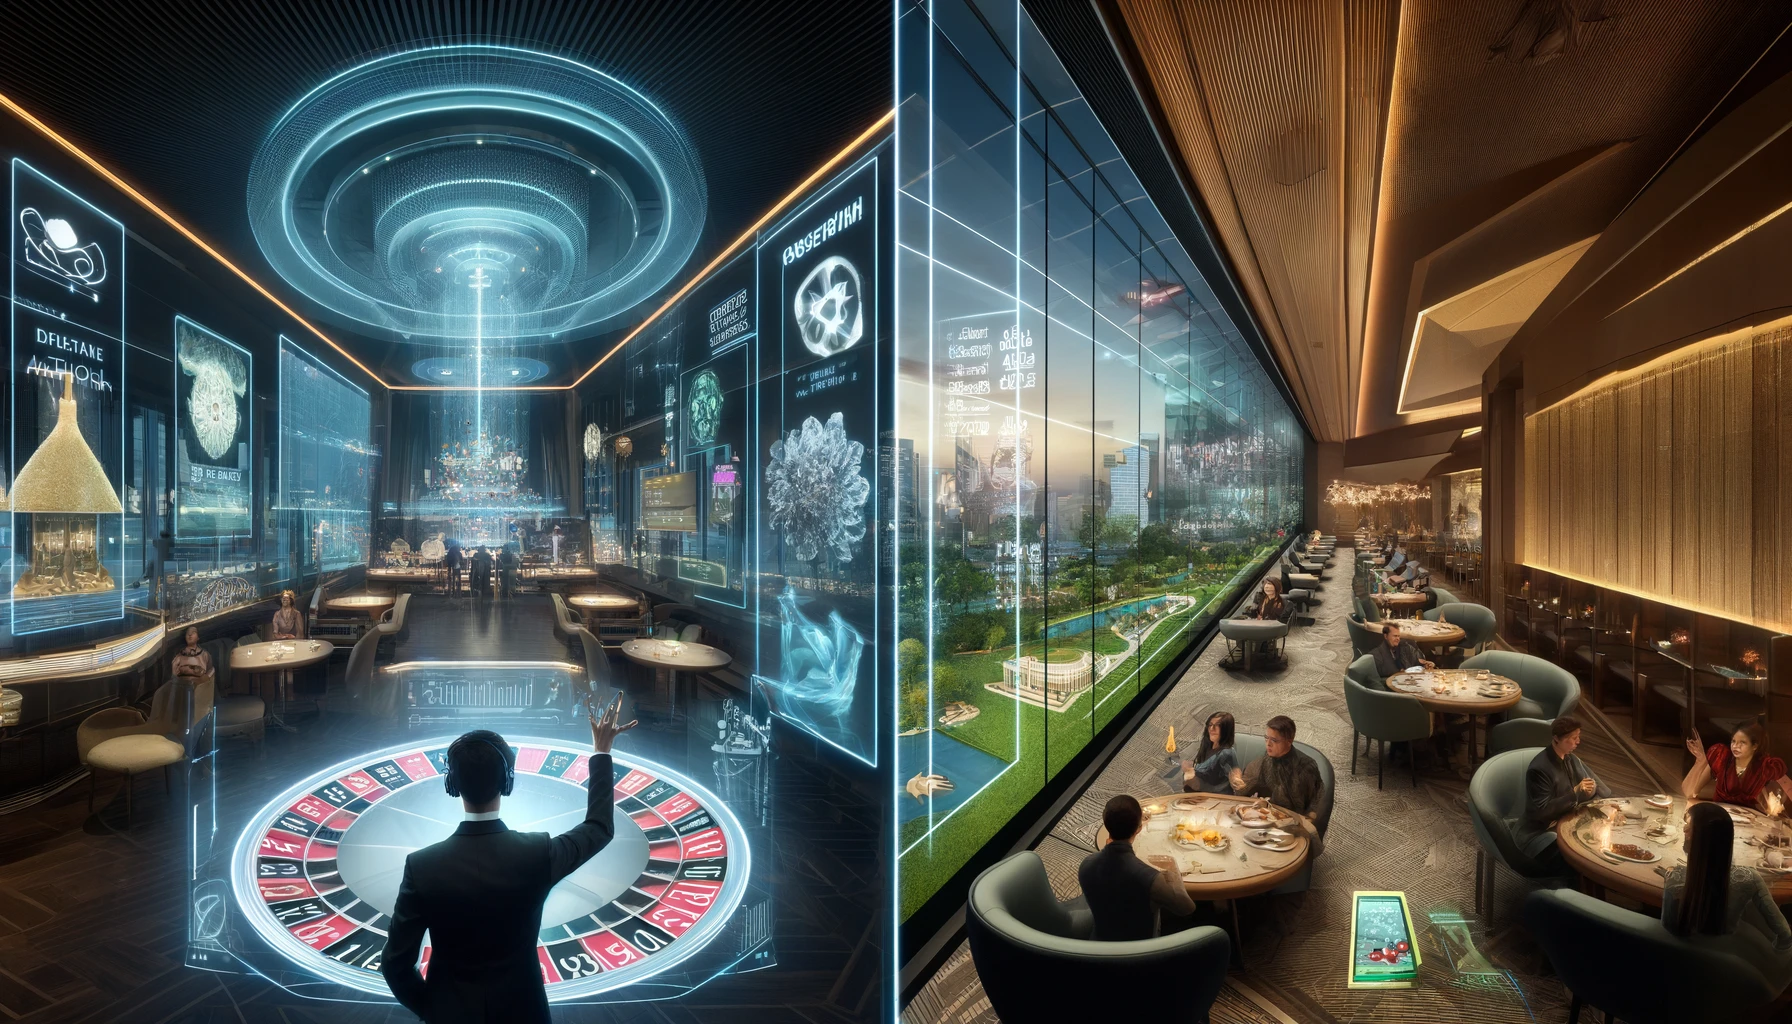 A futuristic casino with holographic displays and AR glasses on the left, and a luxurious, sustainable restaurant with a digital concierge and cityscape view on the right.